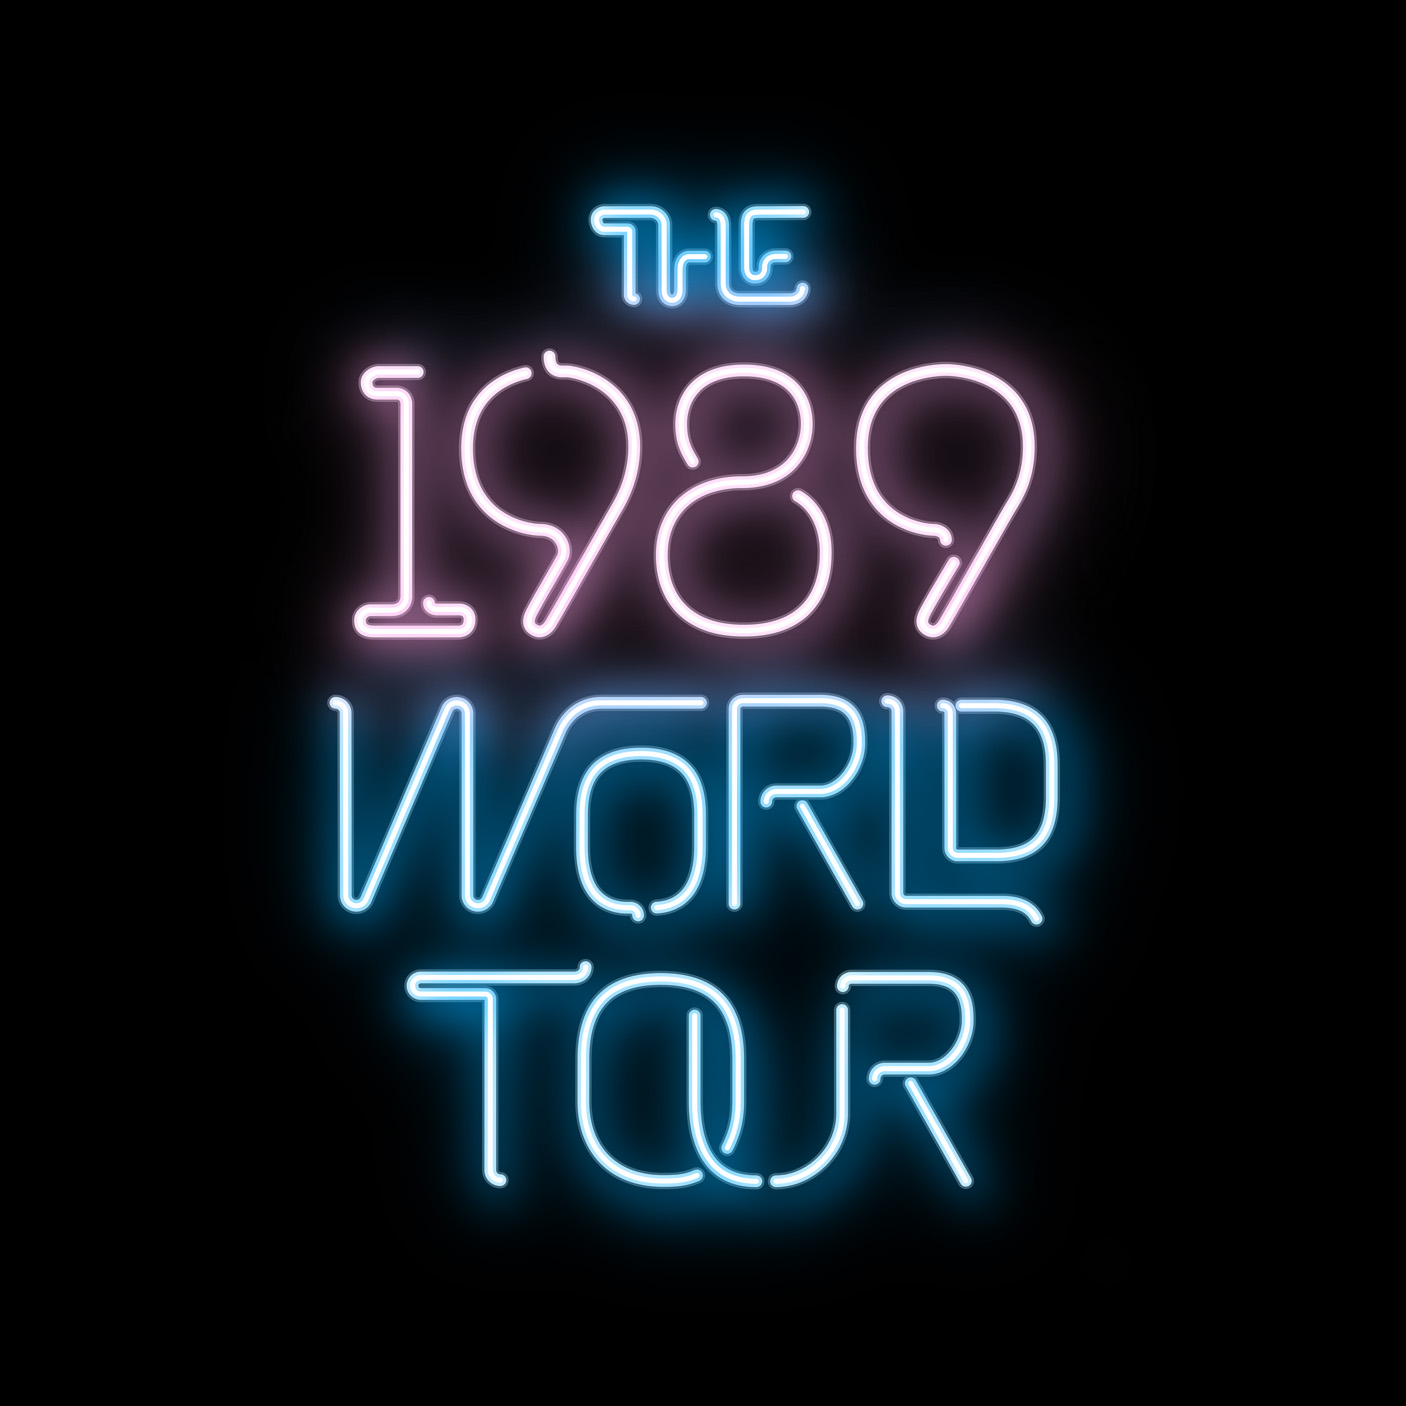 Neon branding and type treatment for Taylor Swift's The 1989 World Tour.